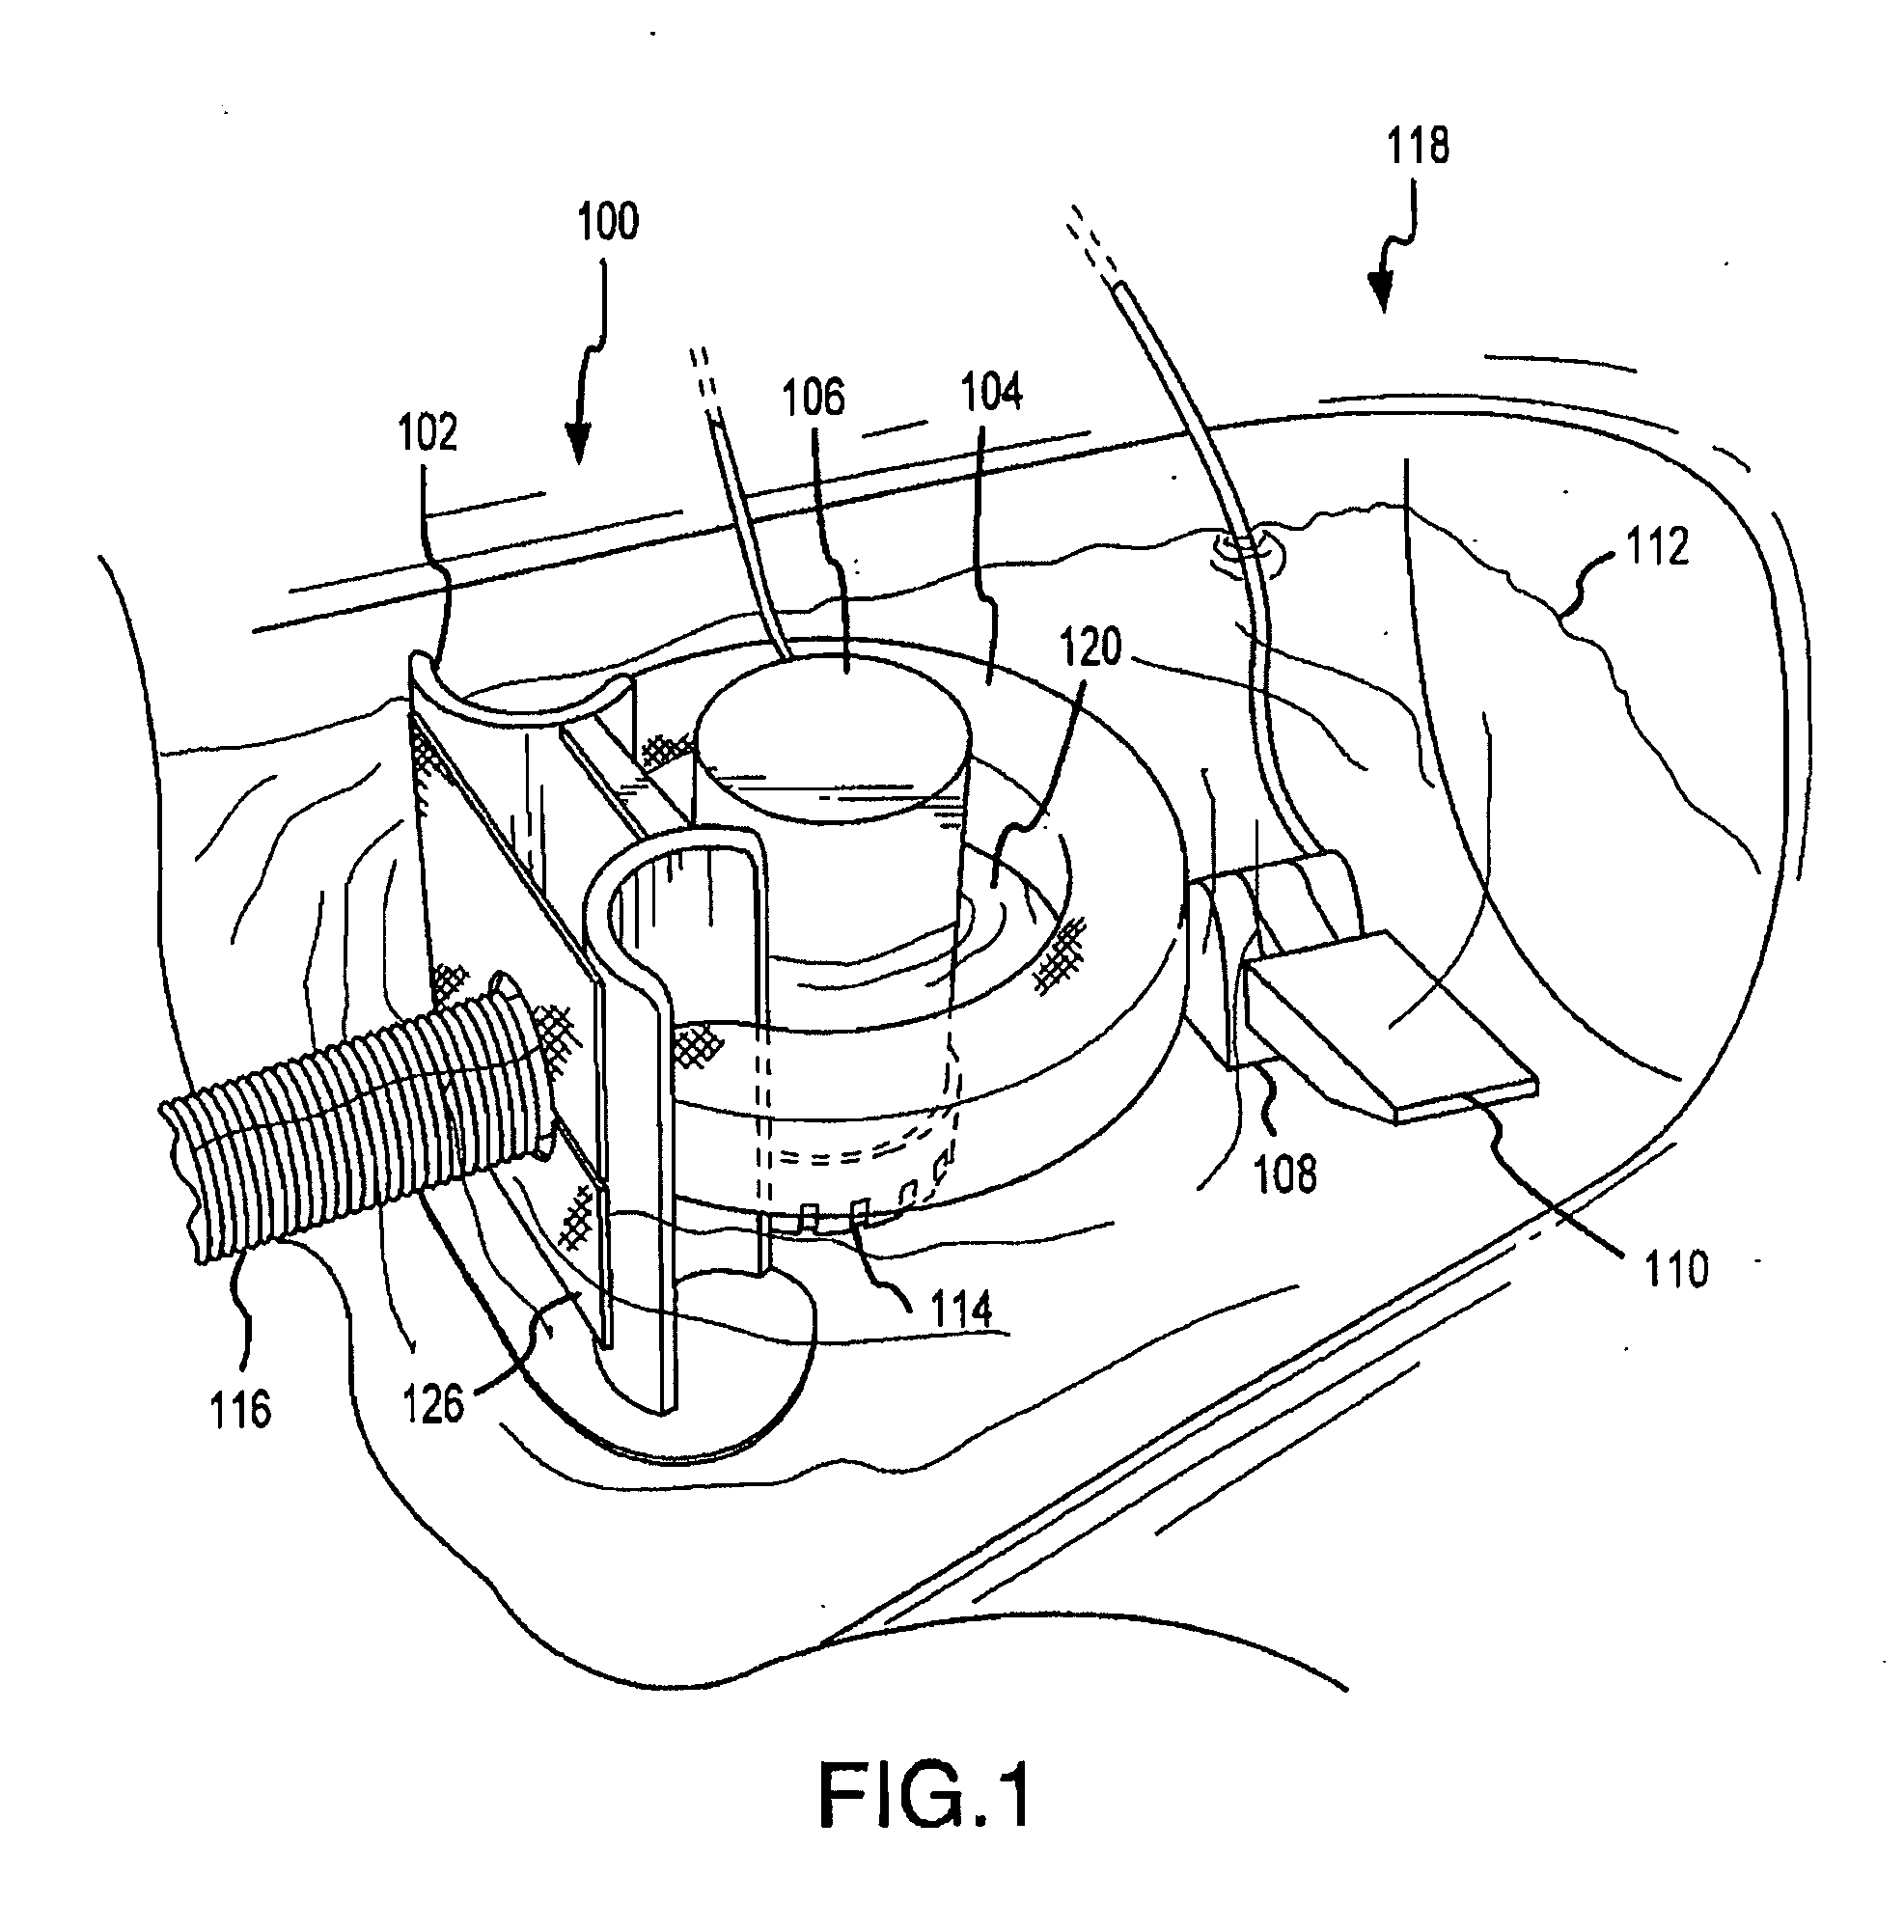 Water pollution prevention and remediation apparatus